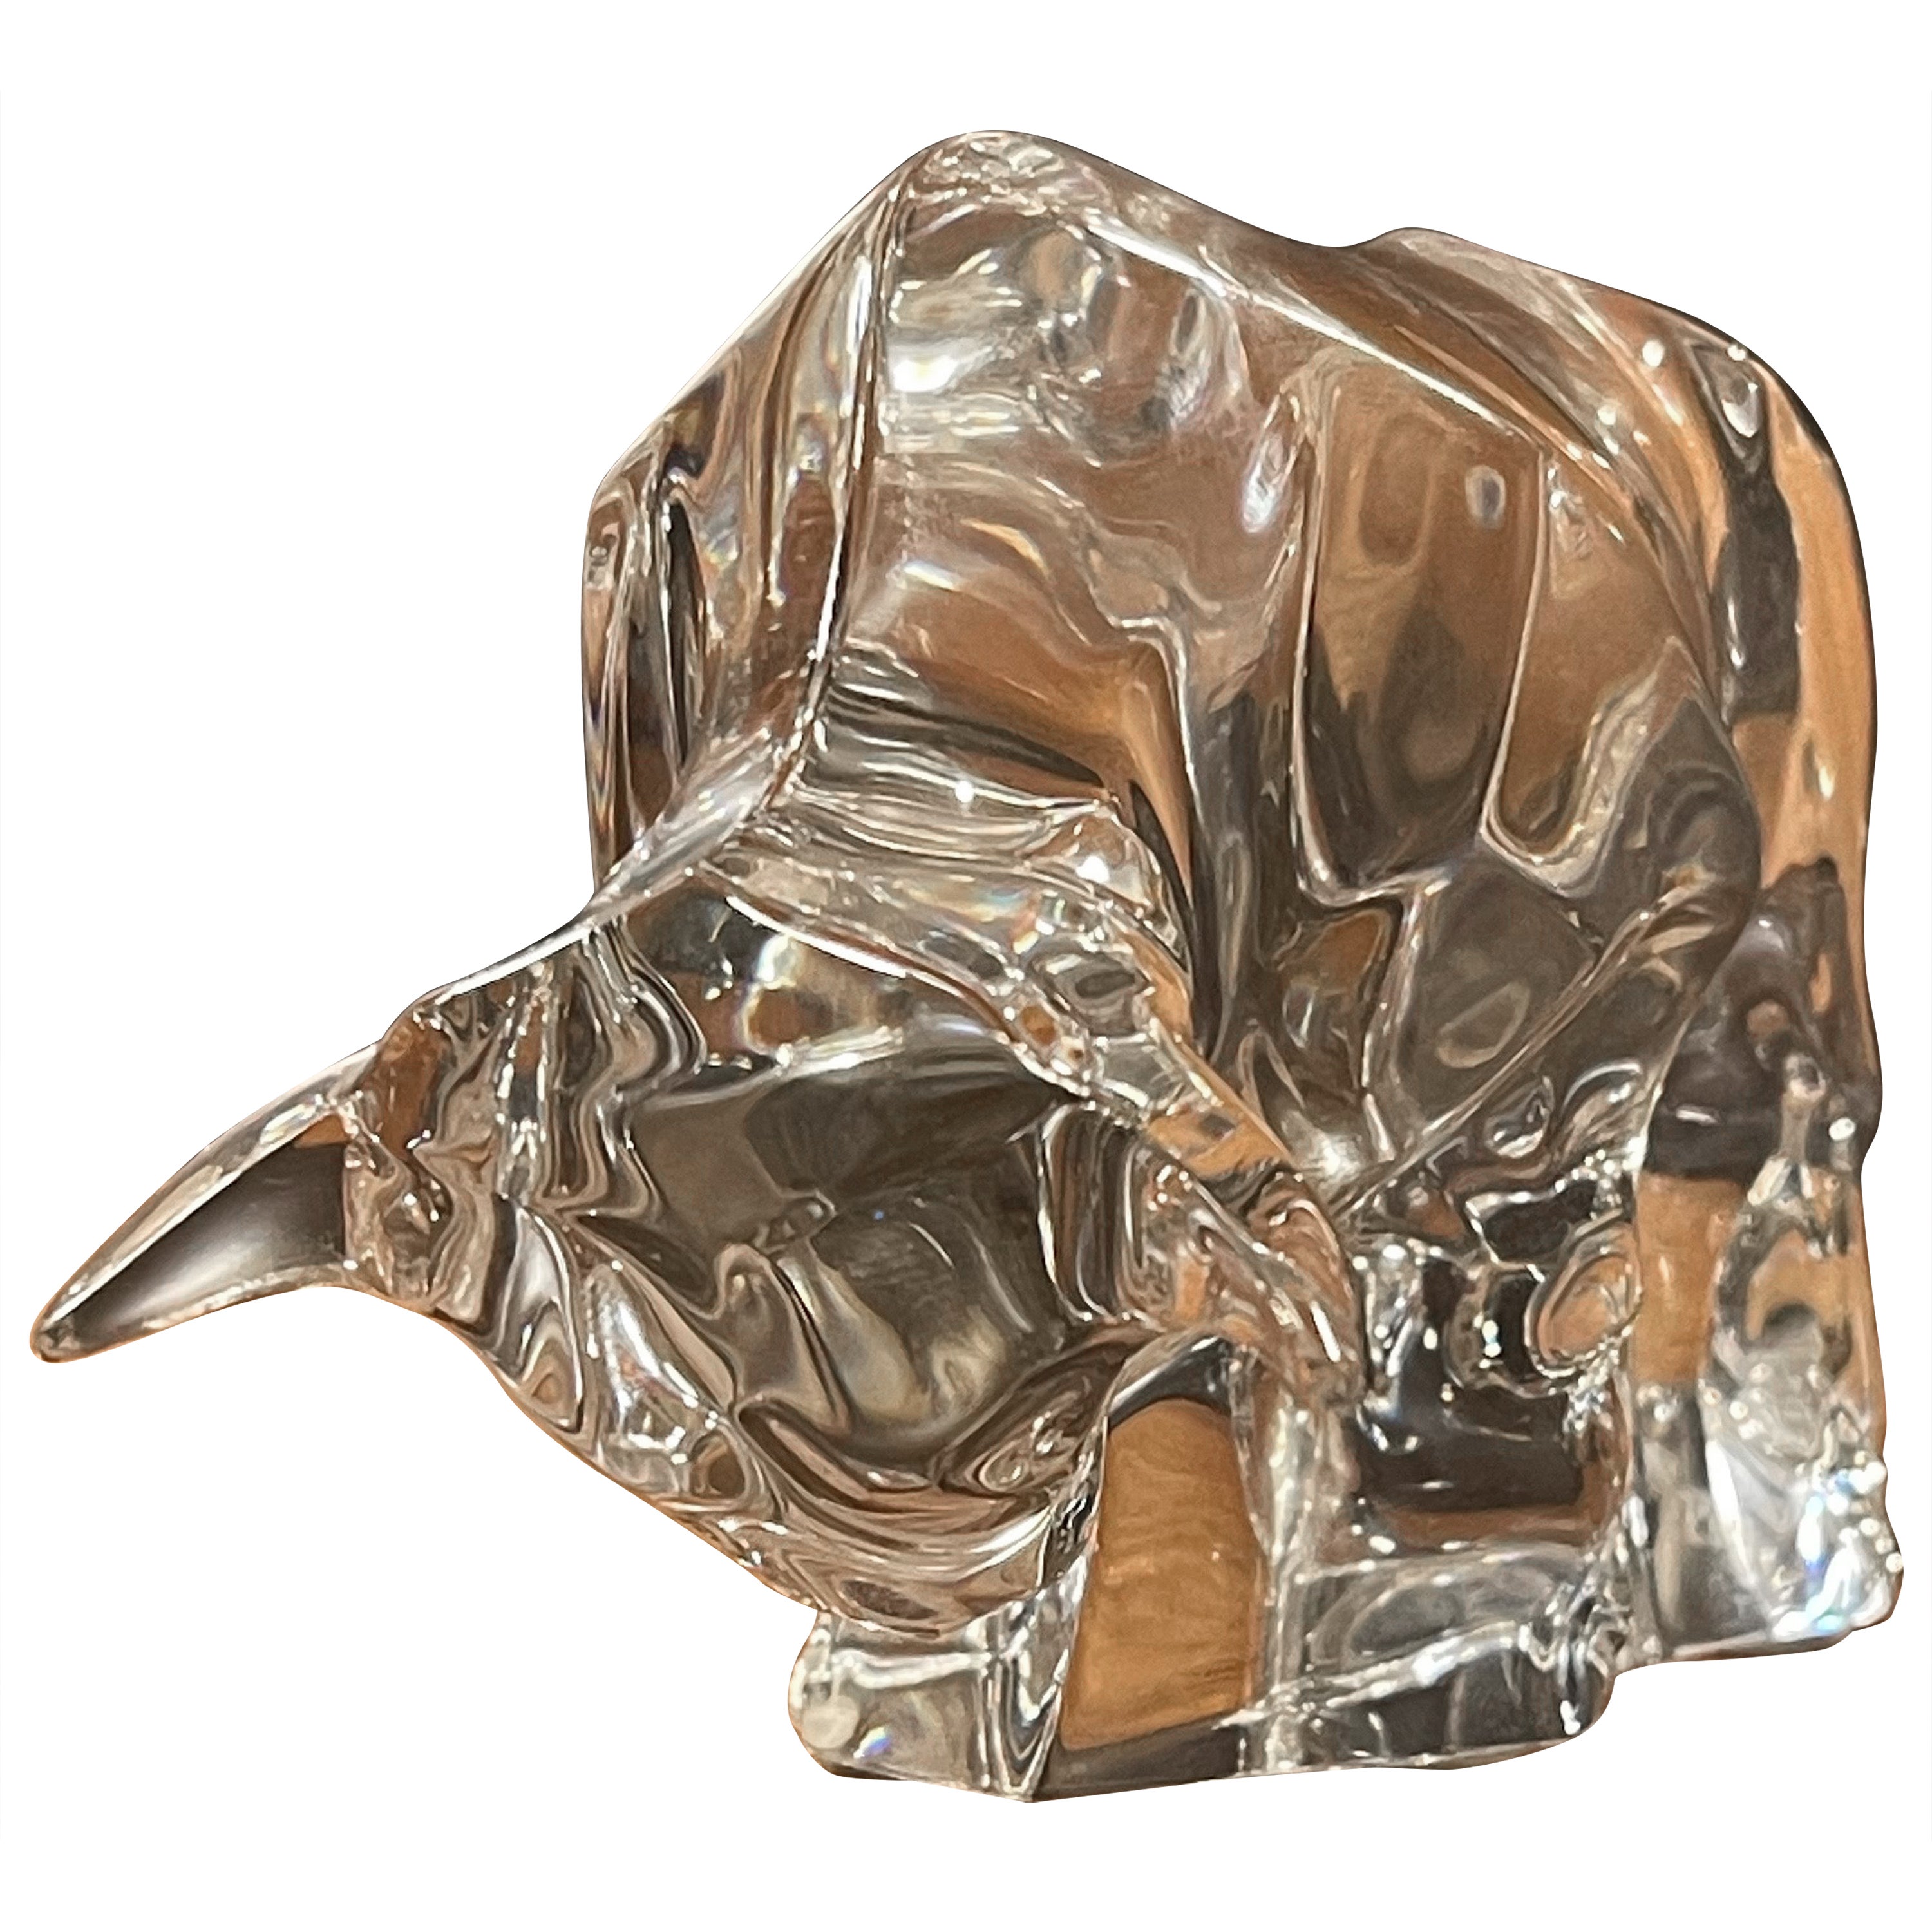 Stylized Crystal Charging Bull Sculpture by Baccarat